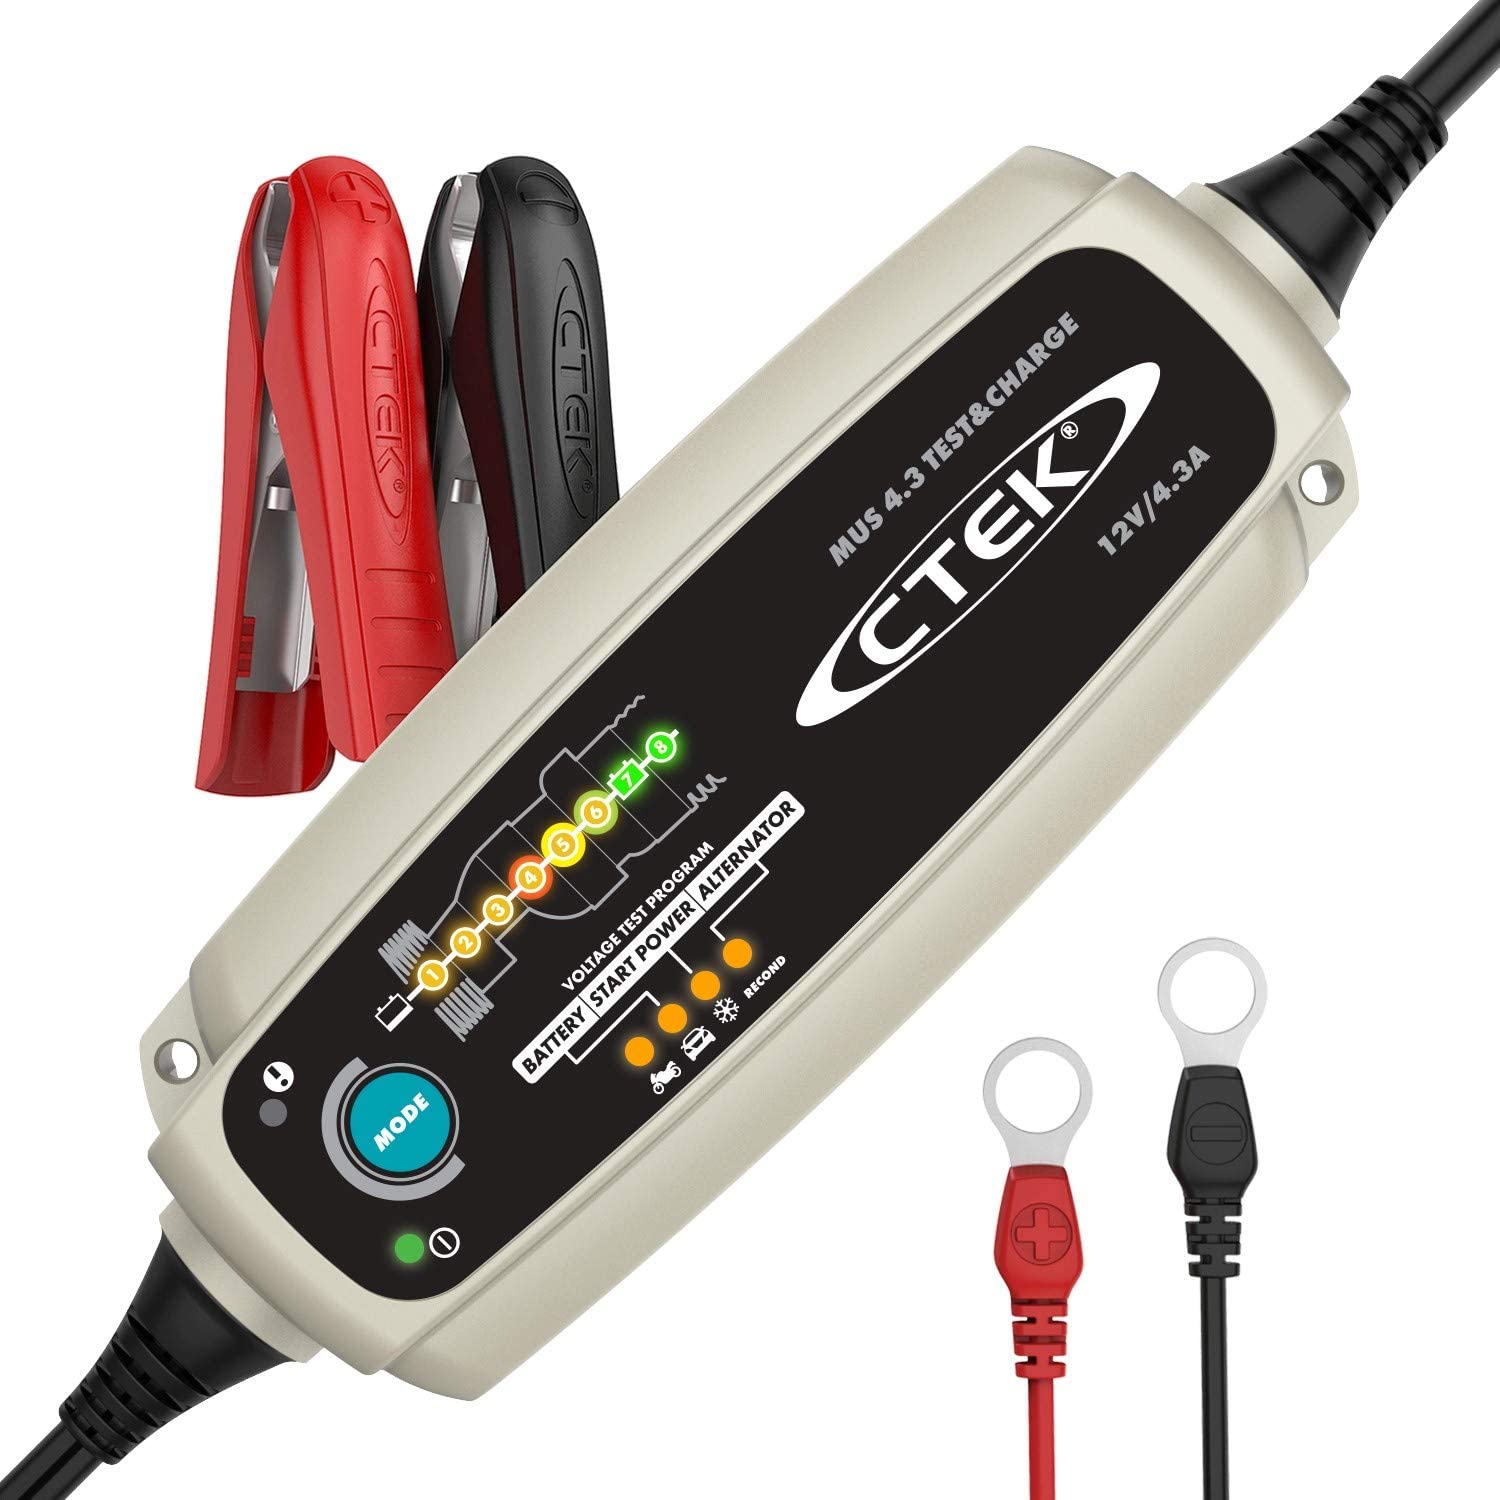 Okklusion telegram Snavset CTEK Silver MUS 4.3 TEST & CHARGE 12 Volt Fully Automatic Charger and